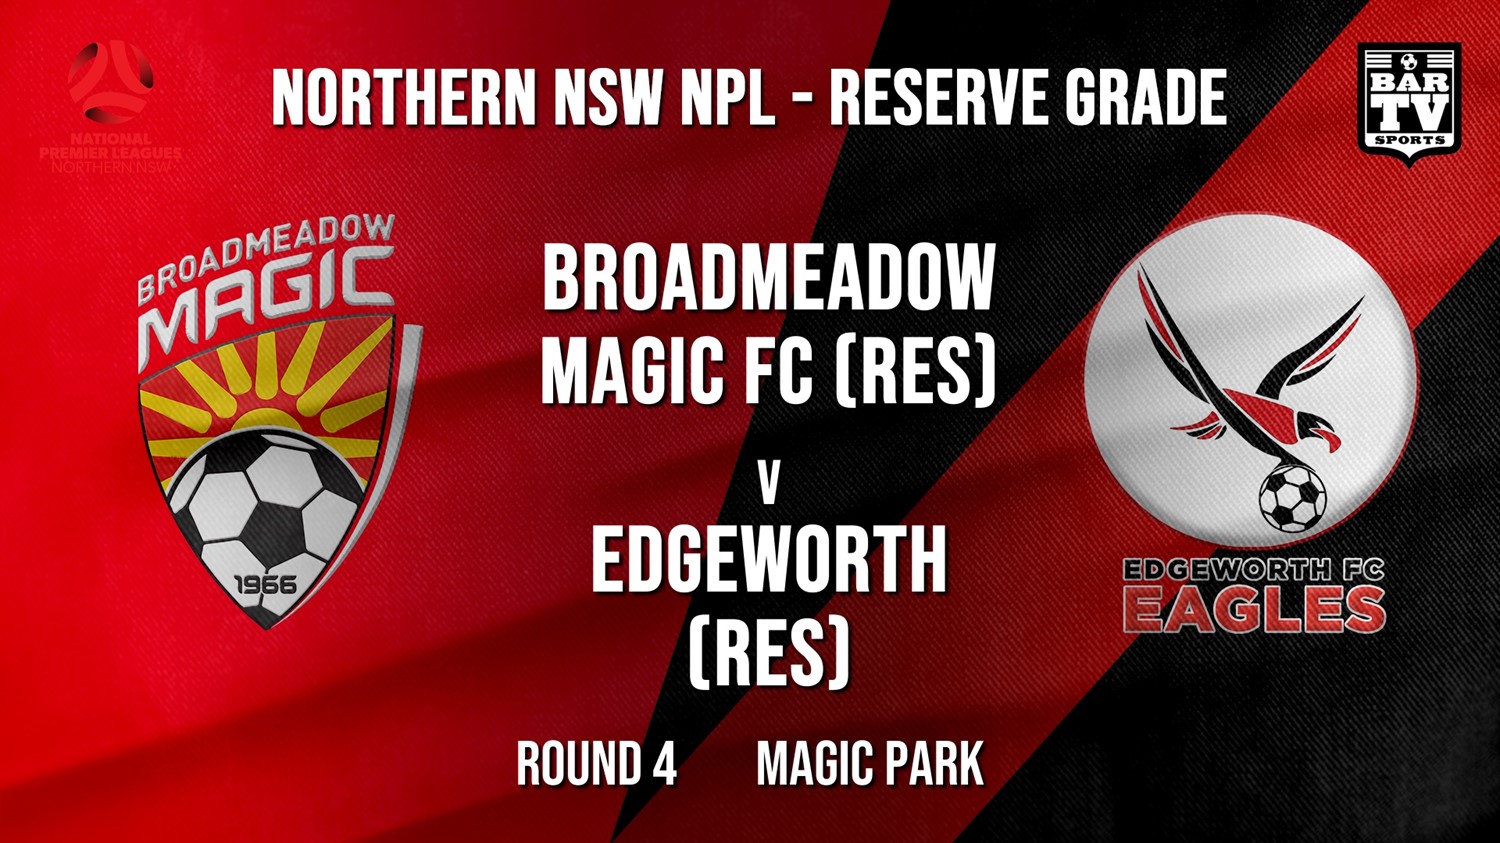 NPL NNSW RES Round 4 - Broadmeadow Magic FC (Res) v Edgeworth Eagles (Res) Minigame Slate Image